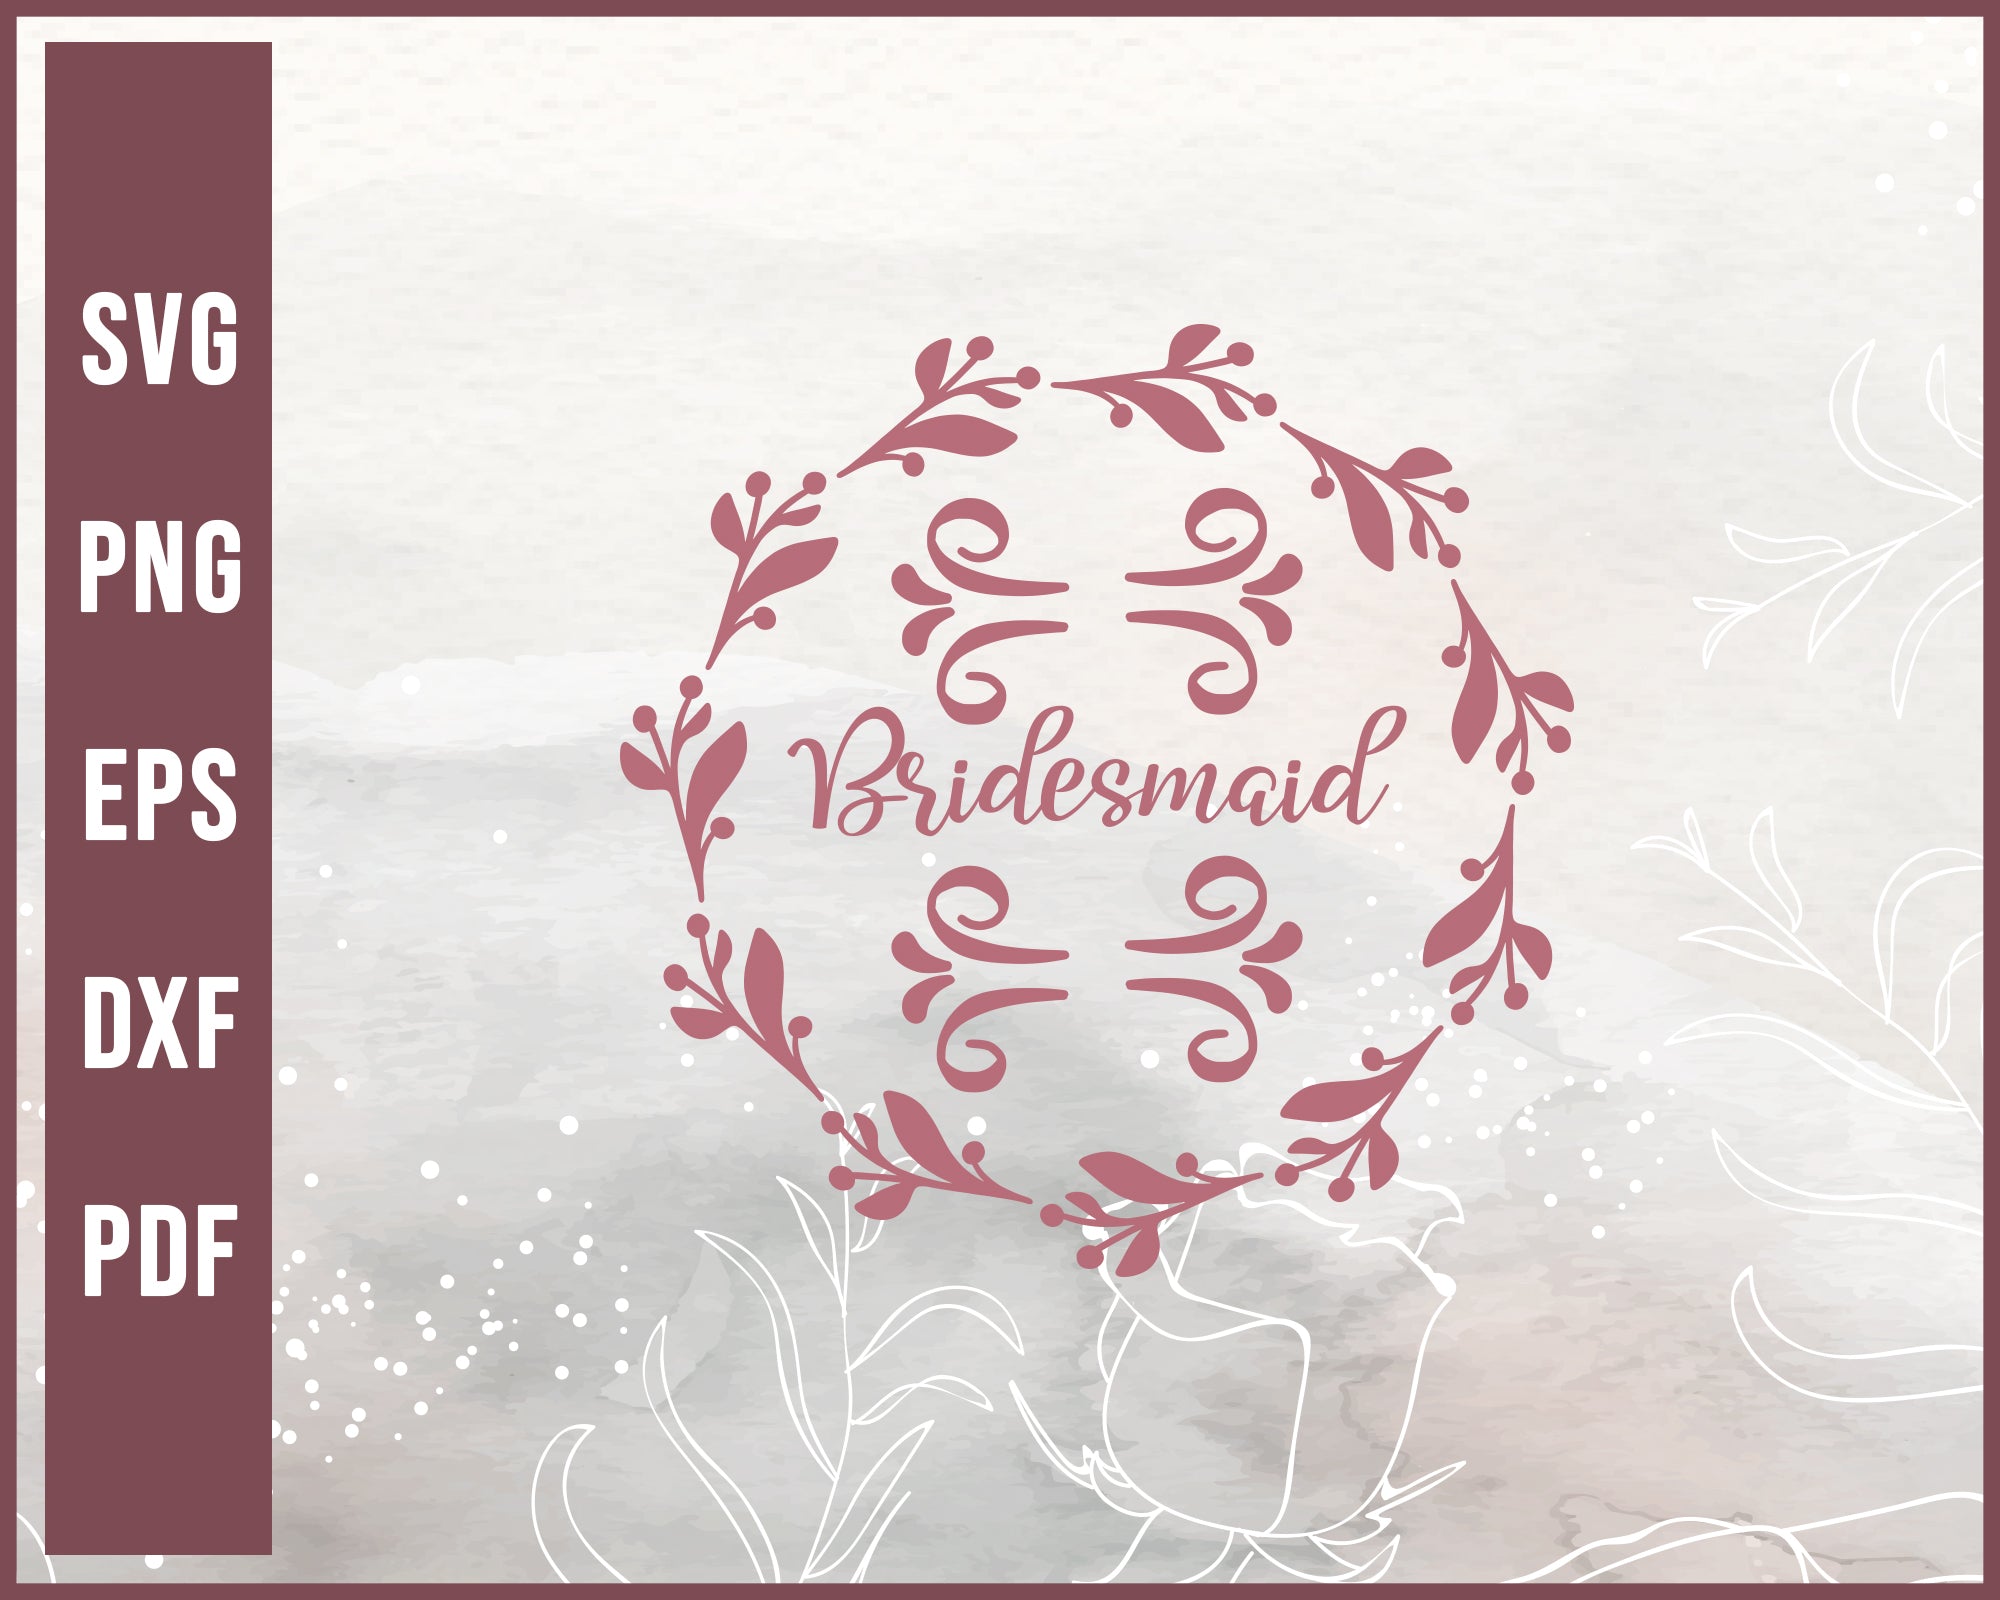 Bridesmaid Wedding svg Designs For Cricut Silhouette And eps png Printable Files